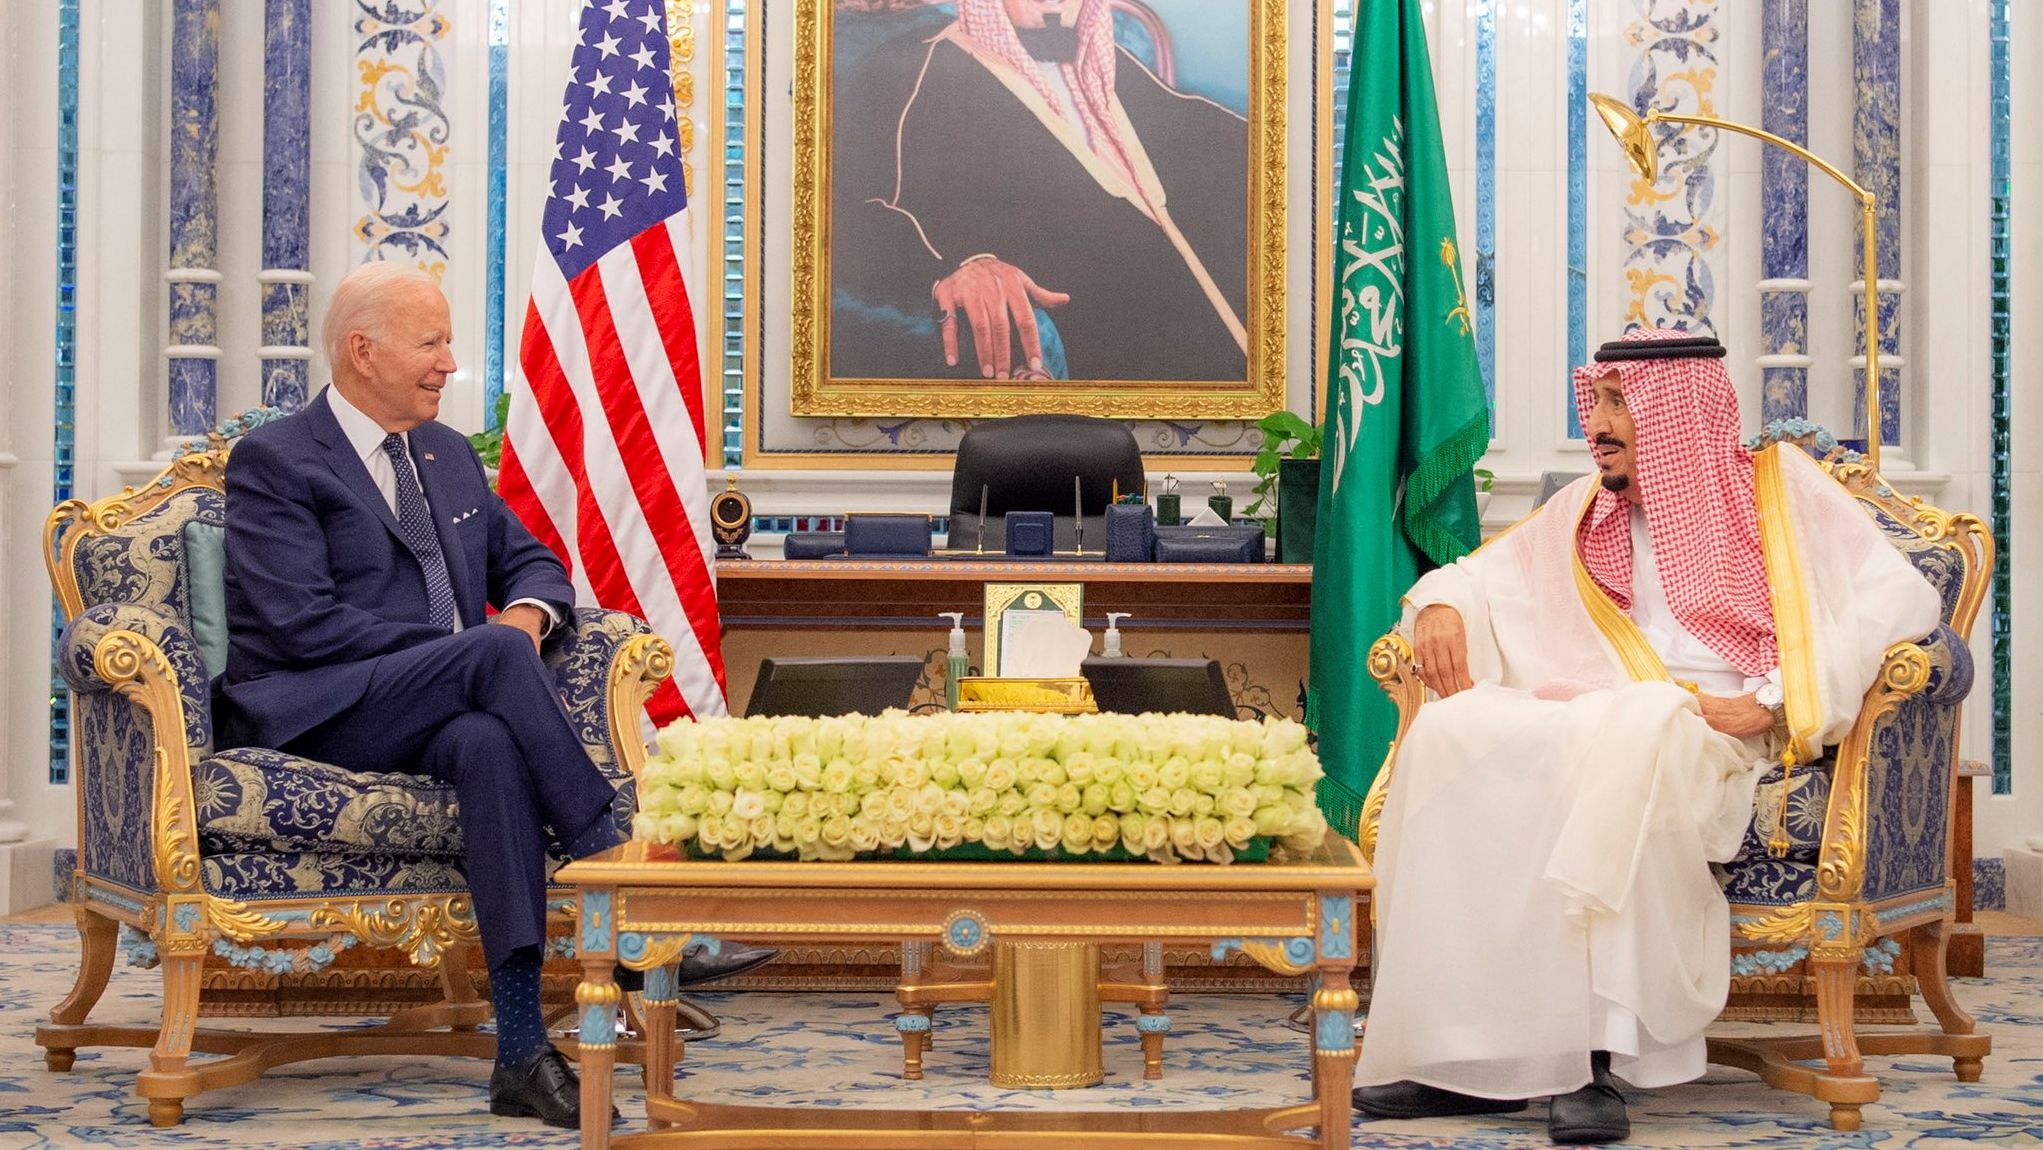 Biden meets with Saudi King Salman at the palace on Friday. But given the King's deteriorating health, the working session was conducted by the Crown Prince.